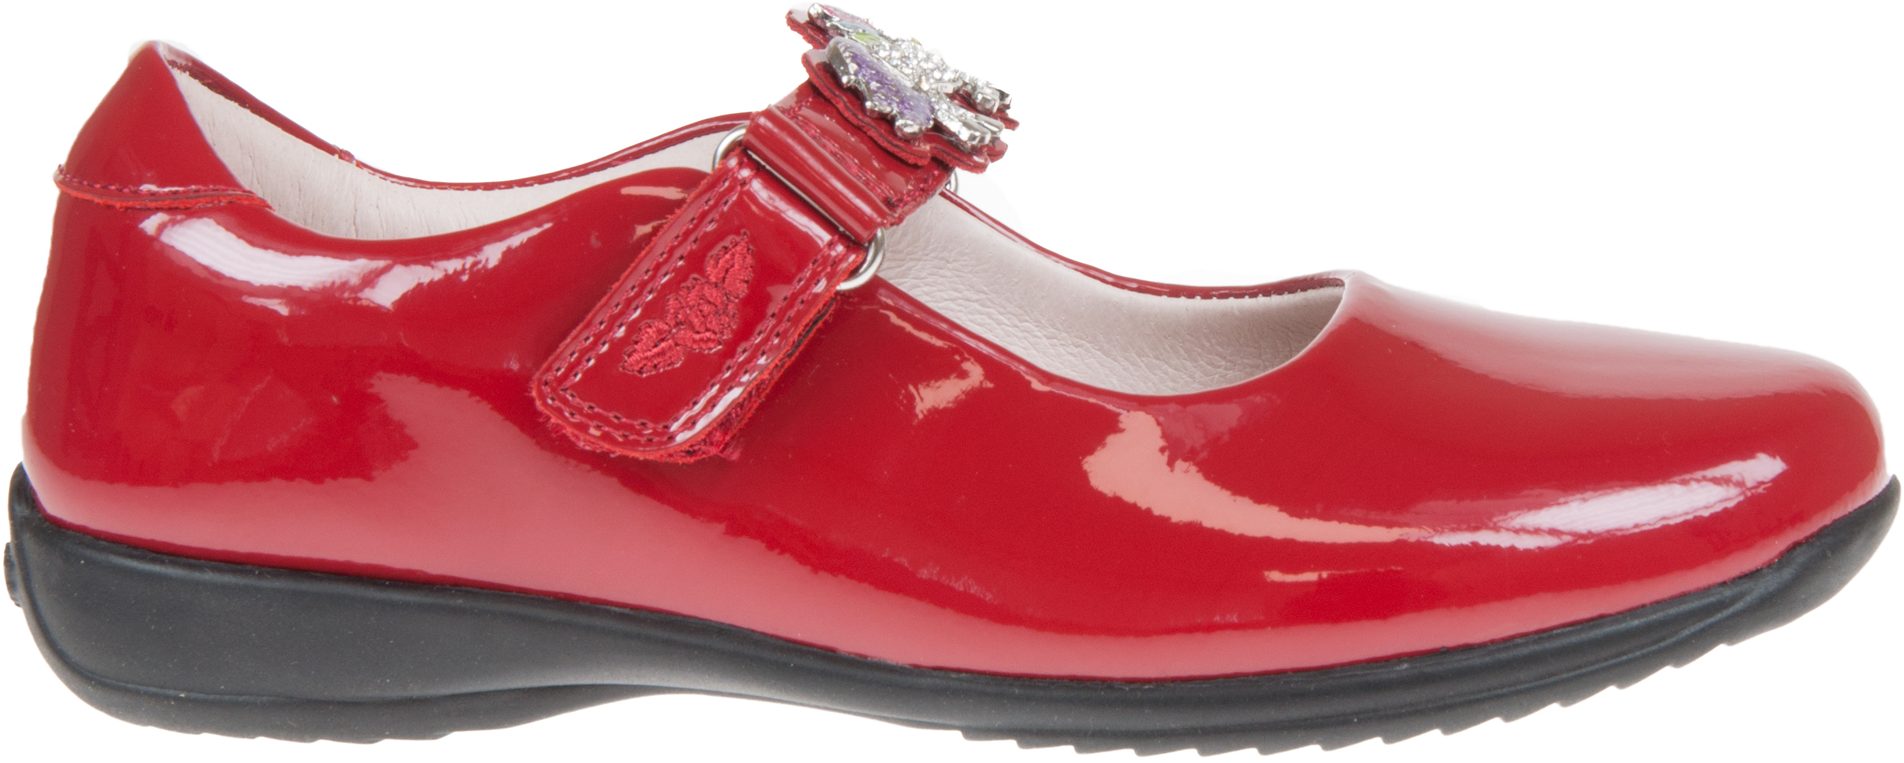 Lelli Kelly Blossom Red Patent LK8312 - Girls Shoes - Humphries Shoes